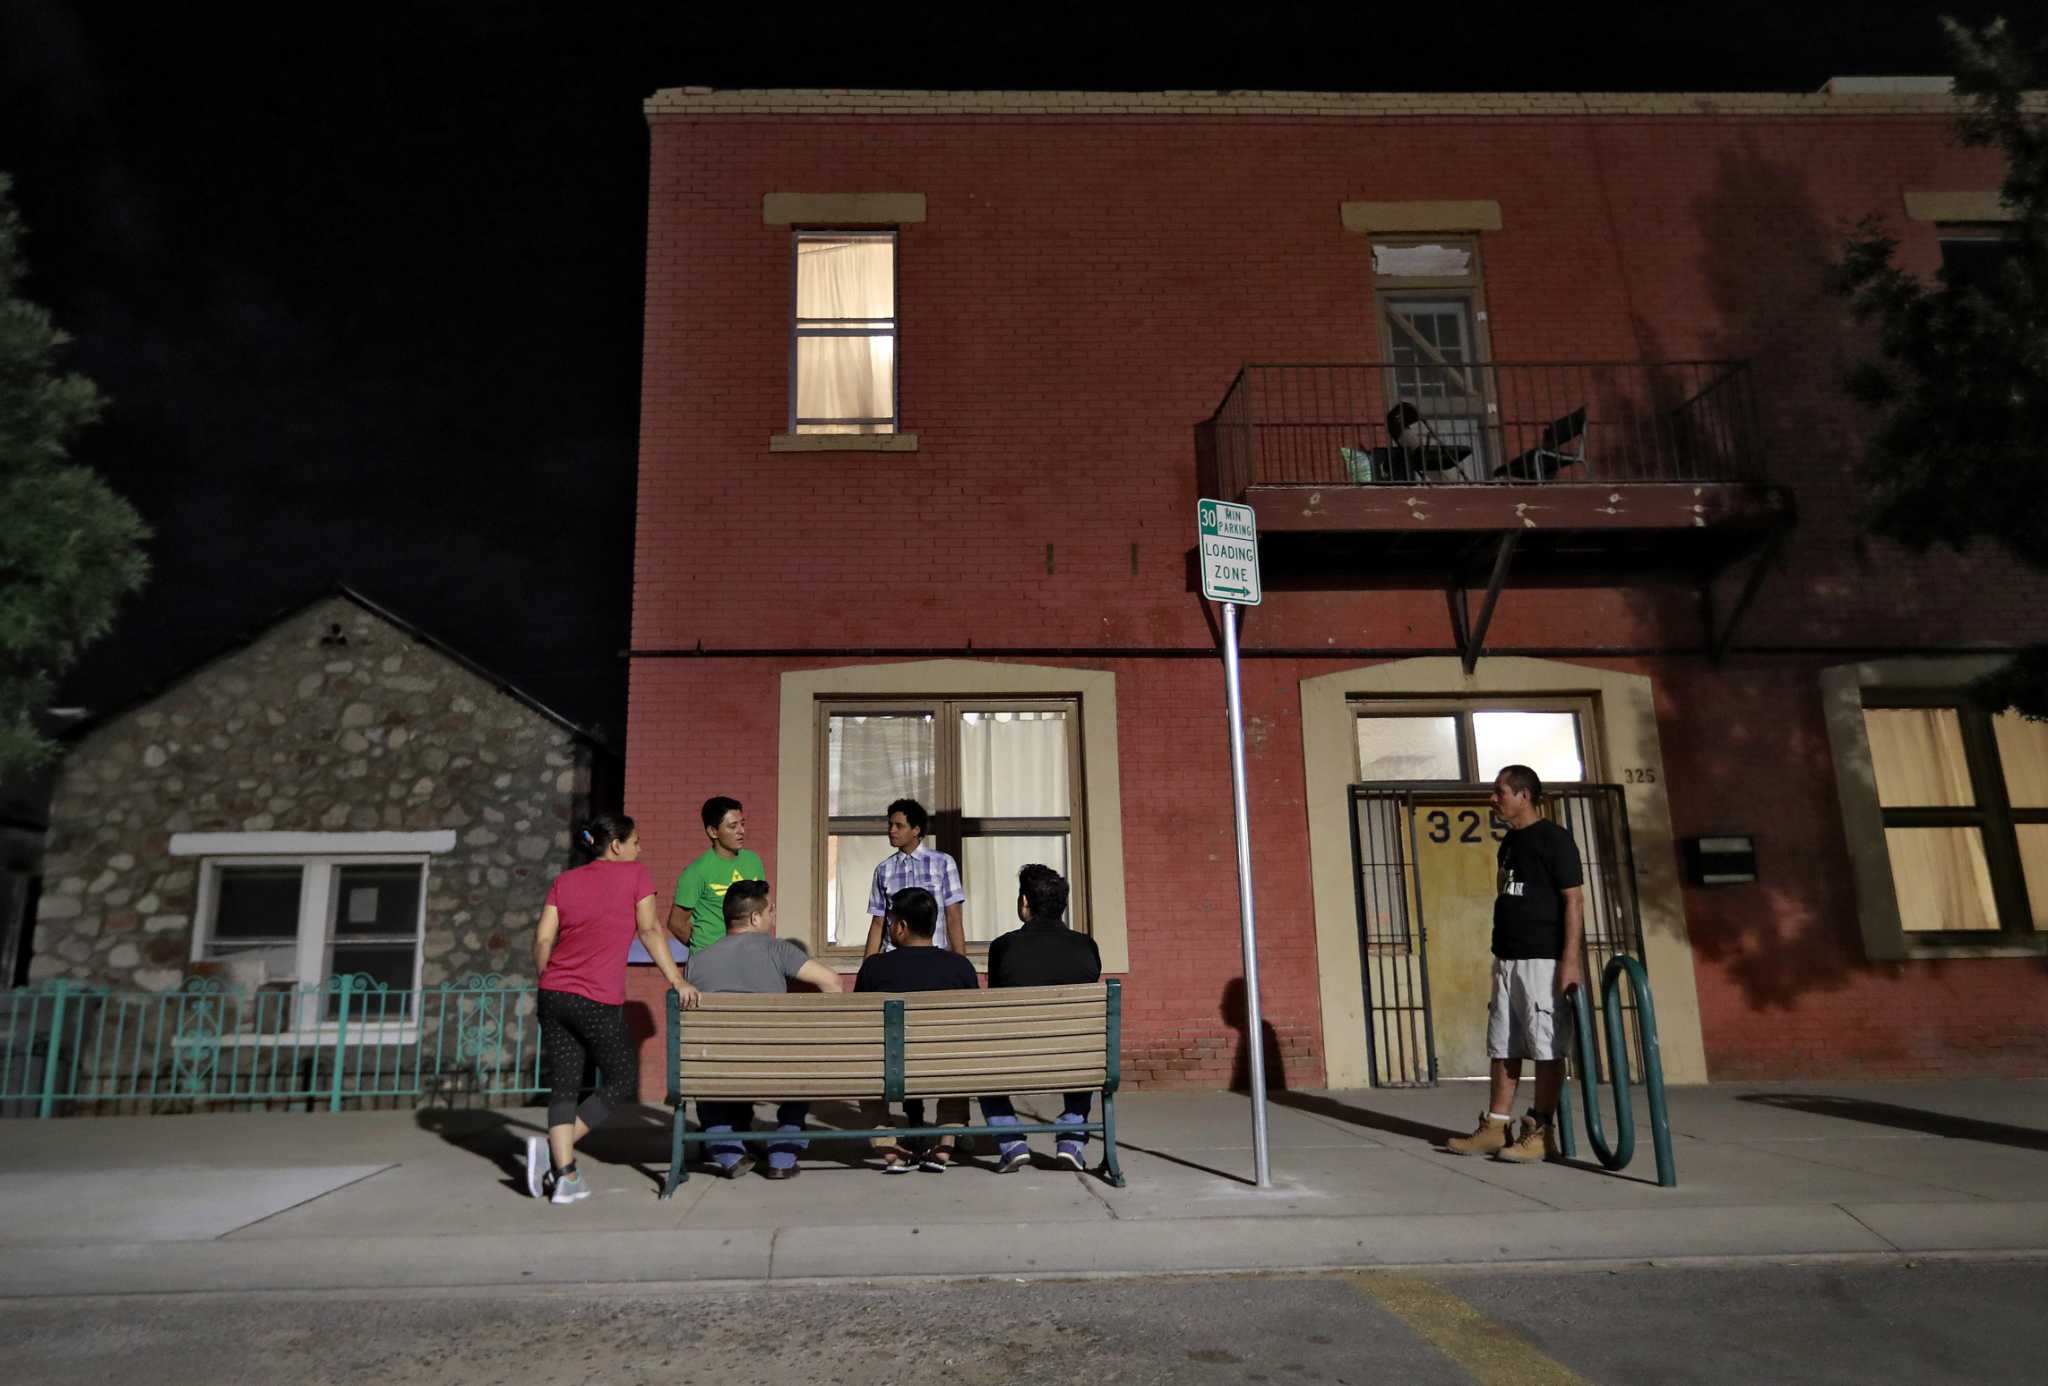 How Texas is still investigating migrant aid groups on the border after a judge's scathing order